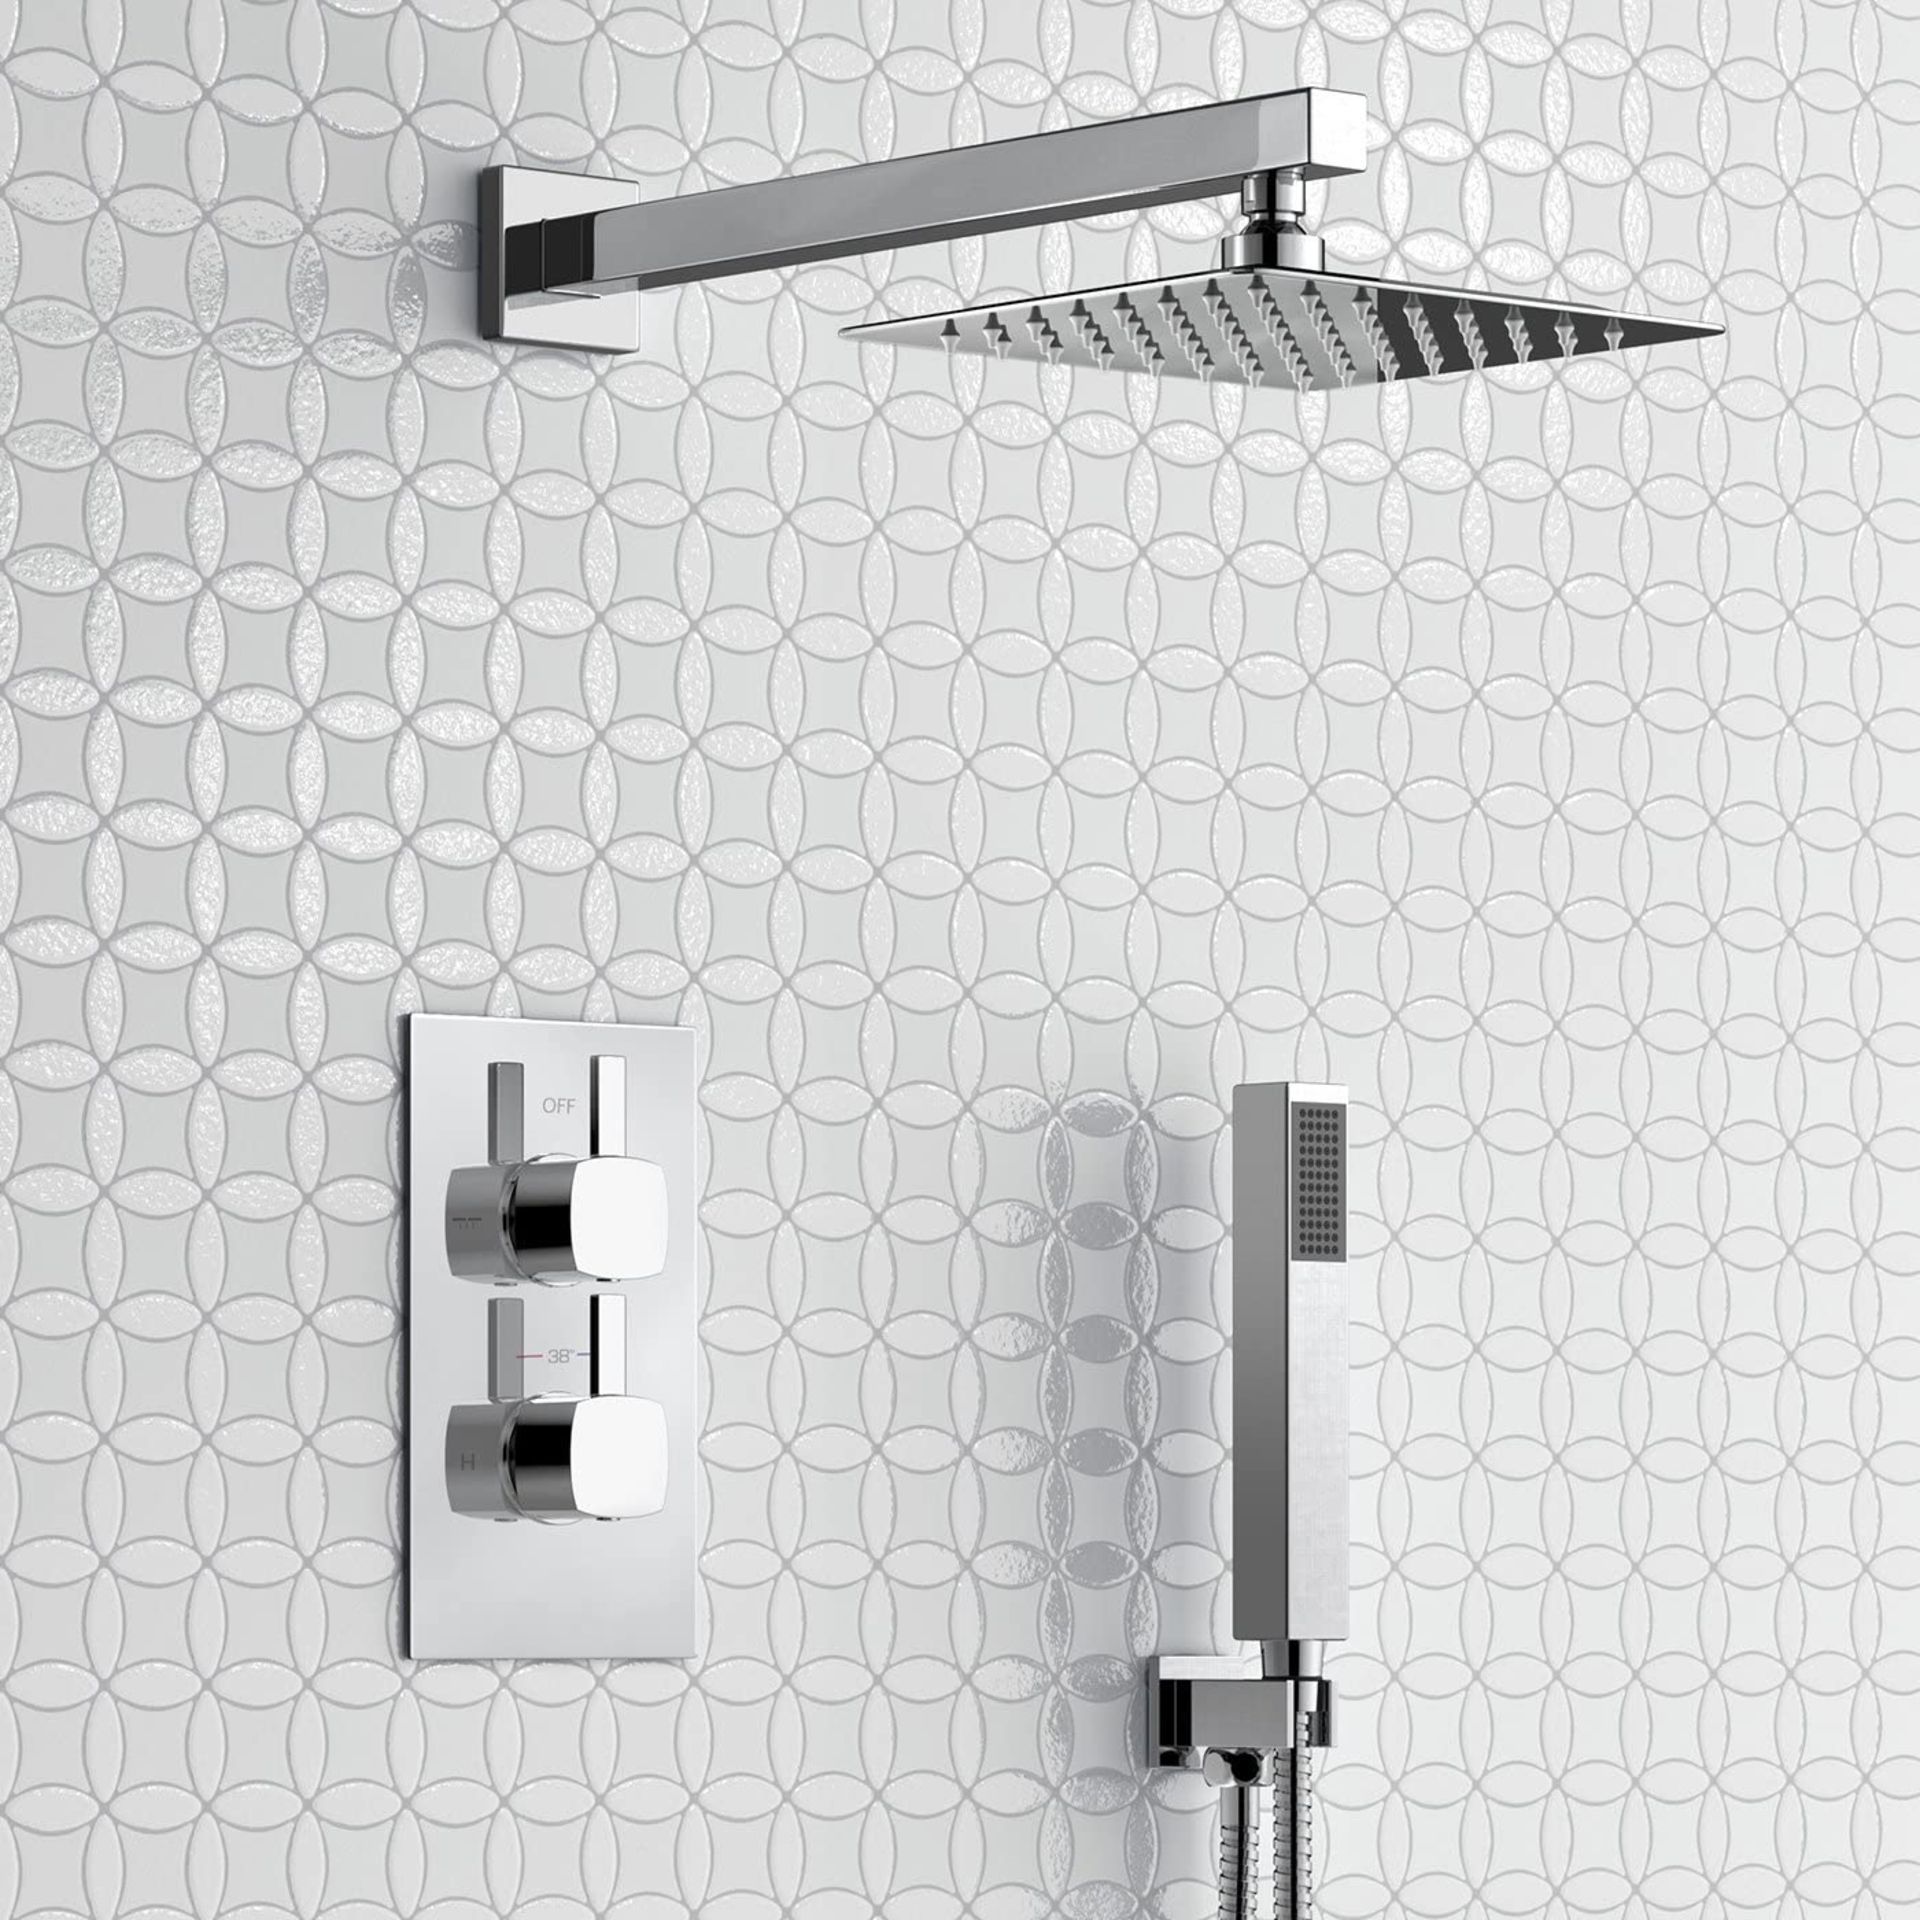 New & Boxed Thermostatic Concealed Mixer Shower Se - Image 2 of 2